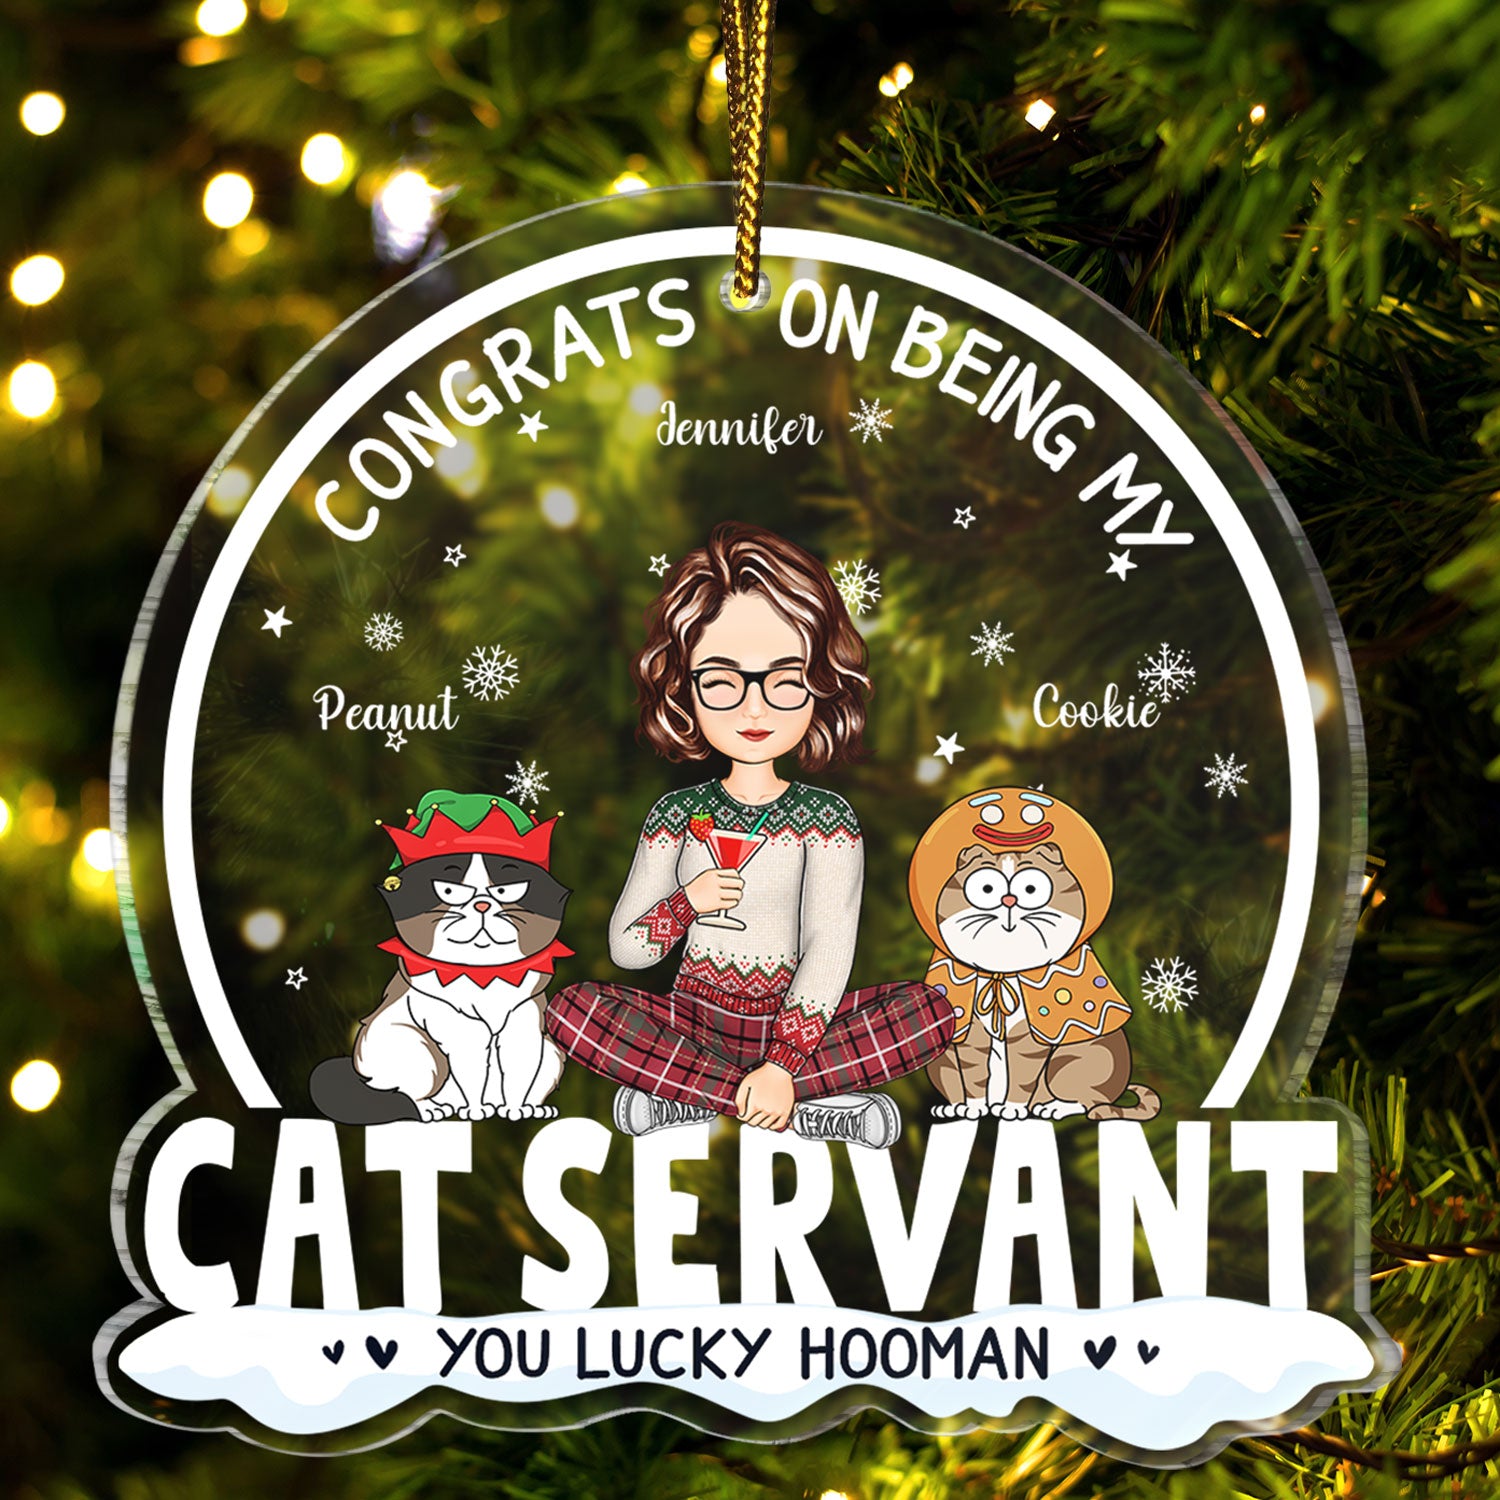 Congrats On Being My Cat Servant Funny Cartoon Style - Christmas Gift For Cat Lovers, Cat Moms, Cat Dads - Personalized Custom Shaped Acrylic Ornament